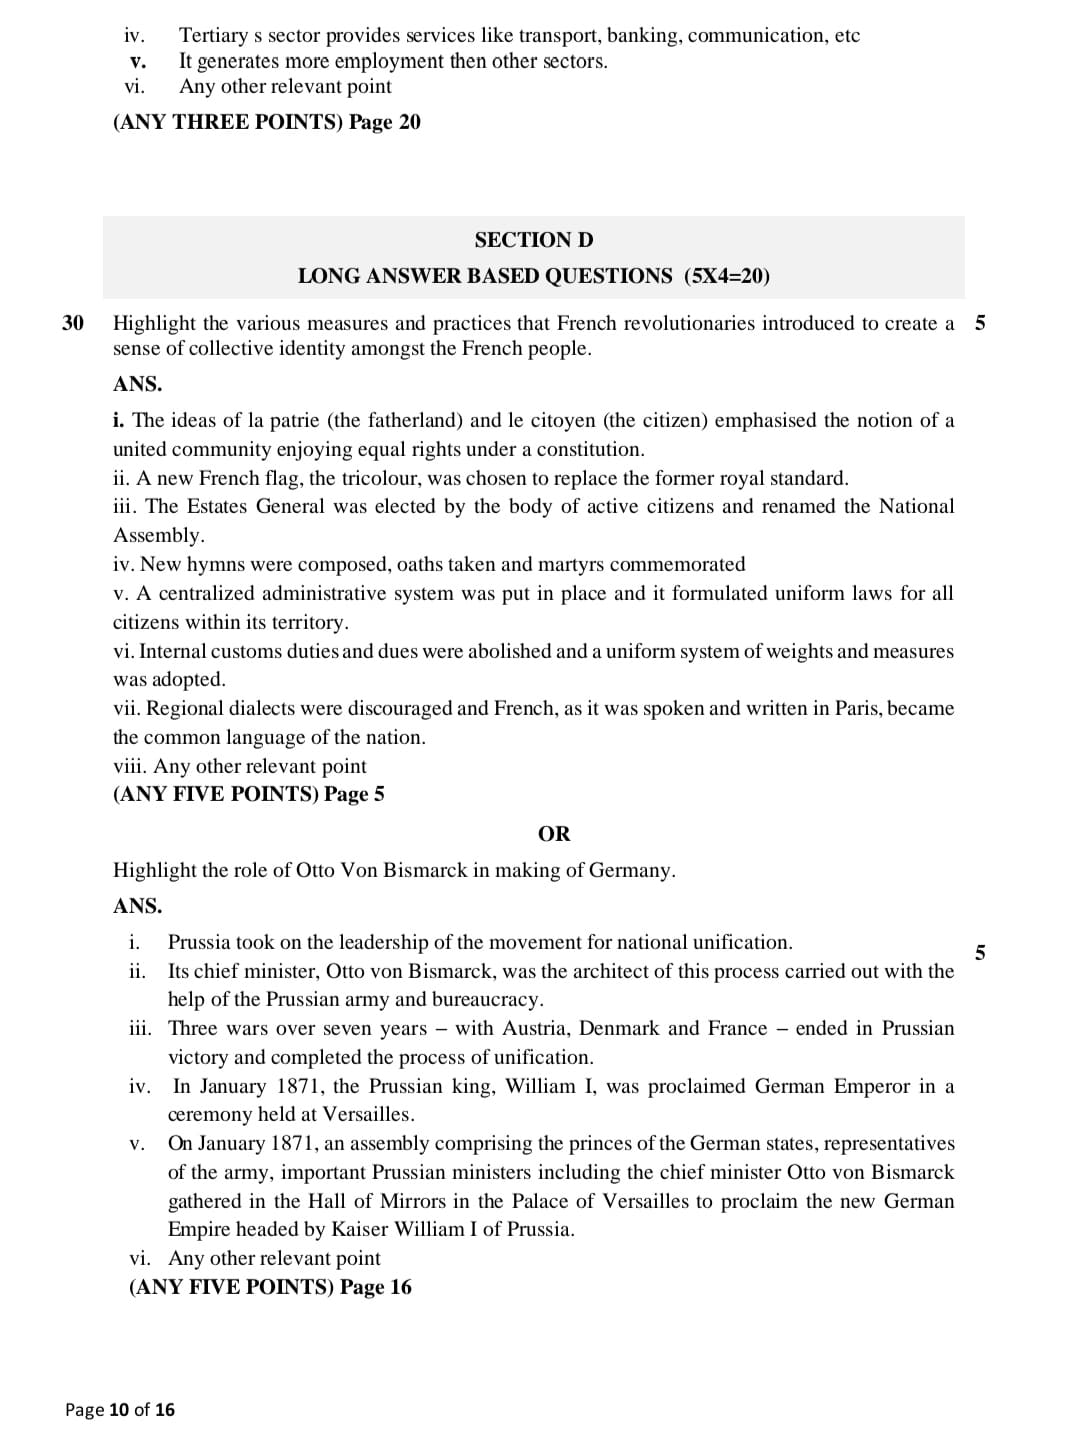 cbse class 10 social science official sample question paper10